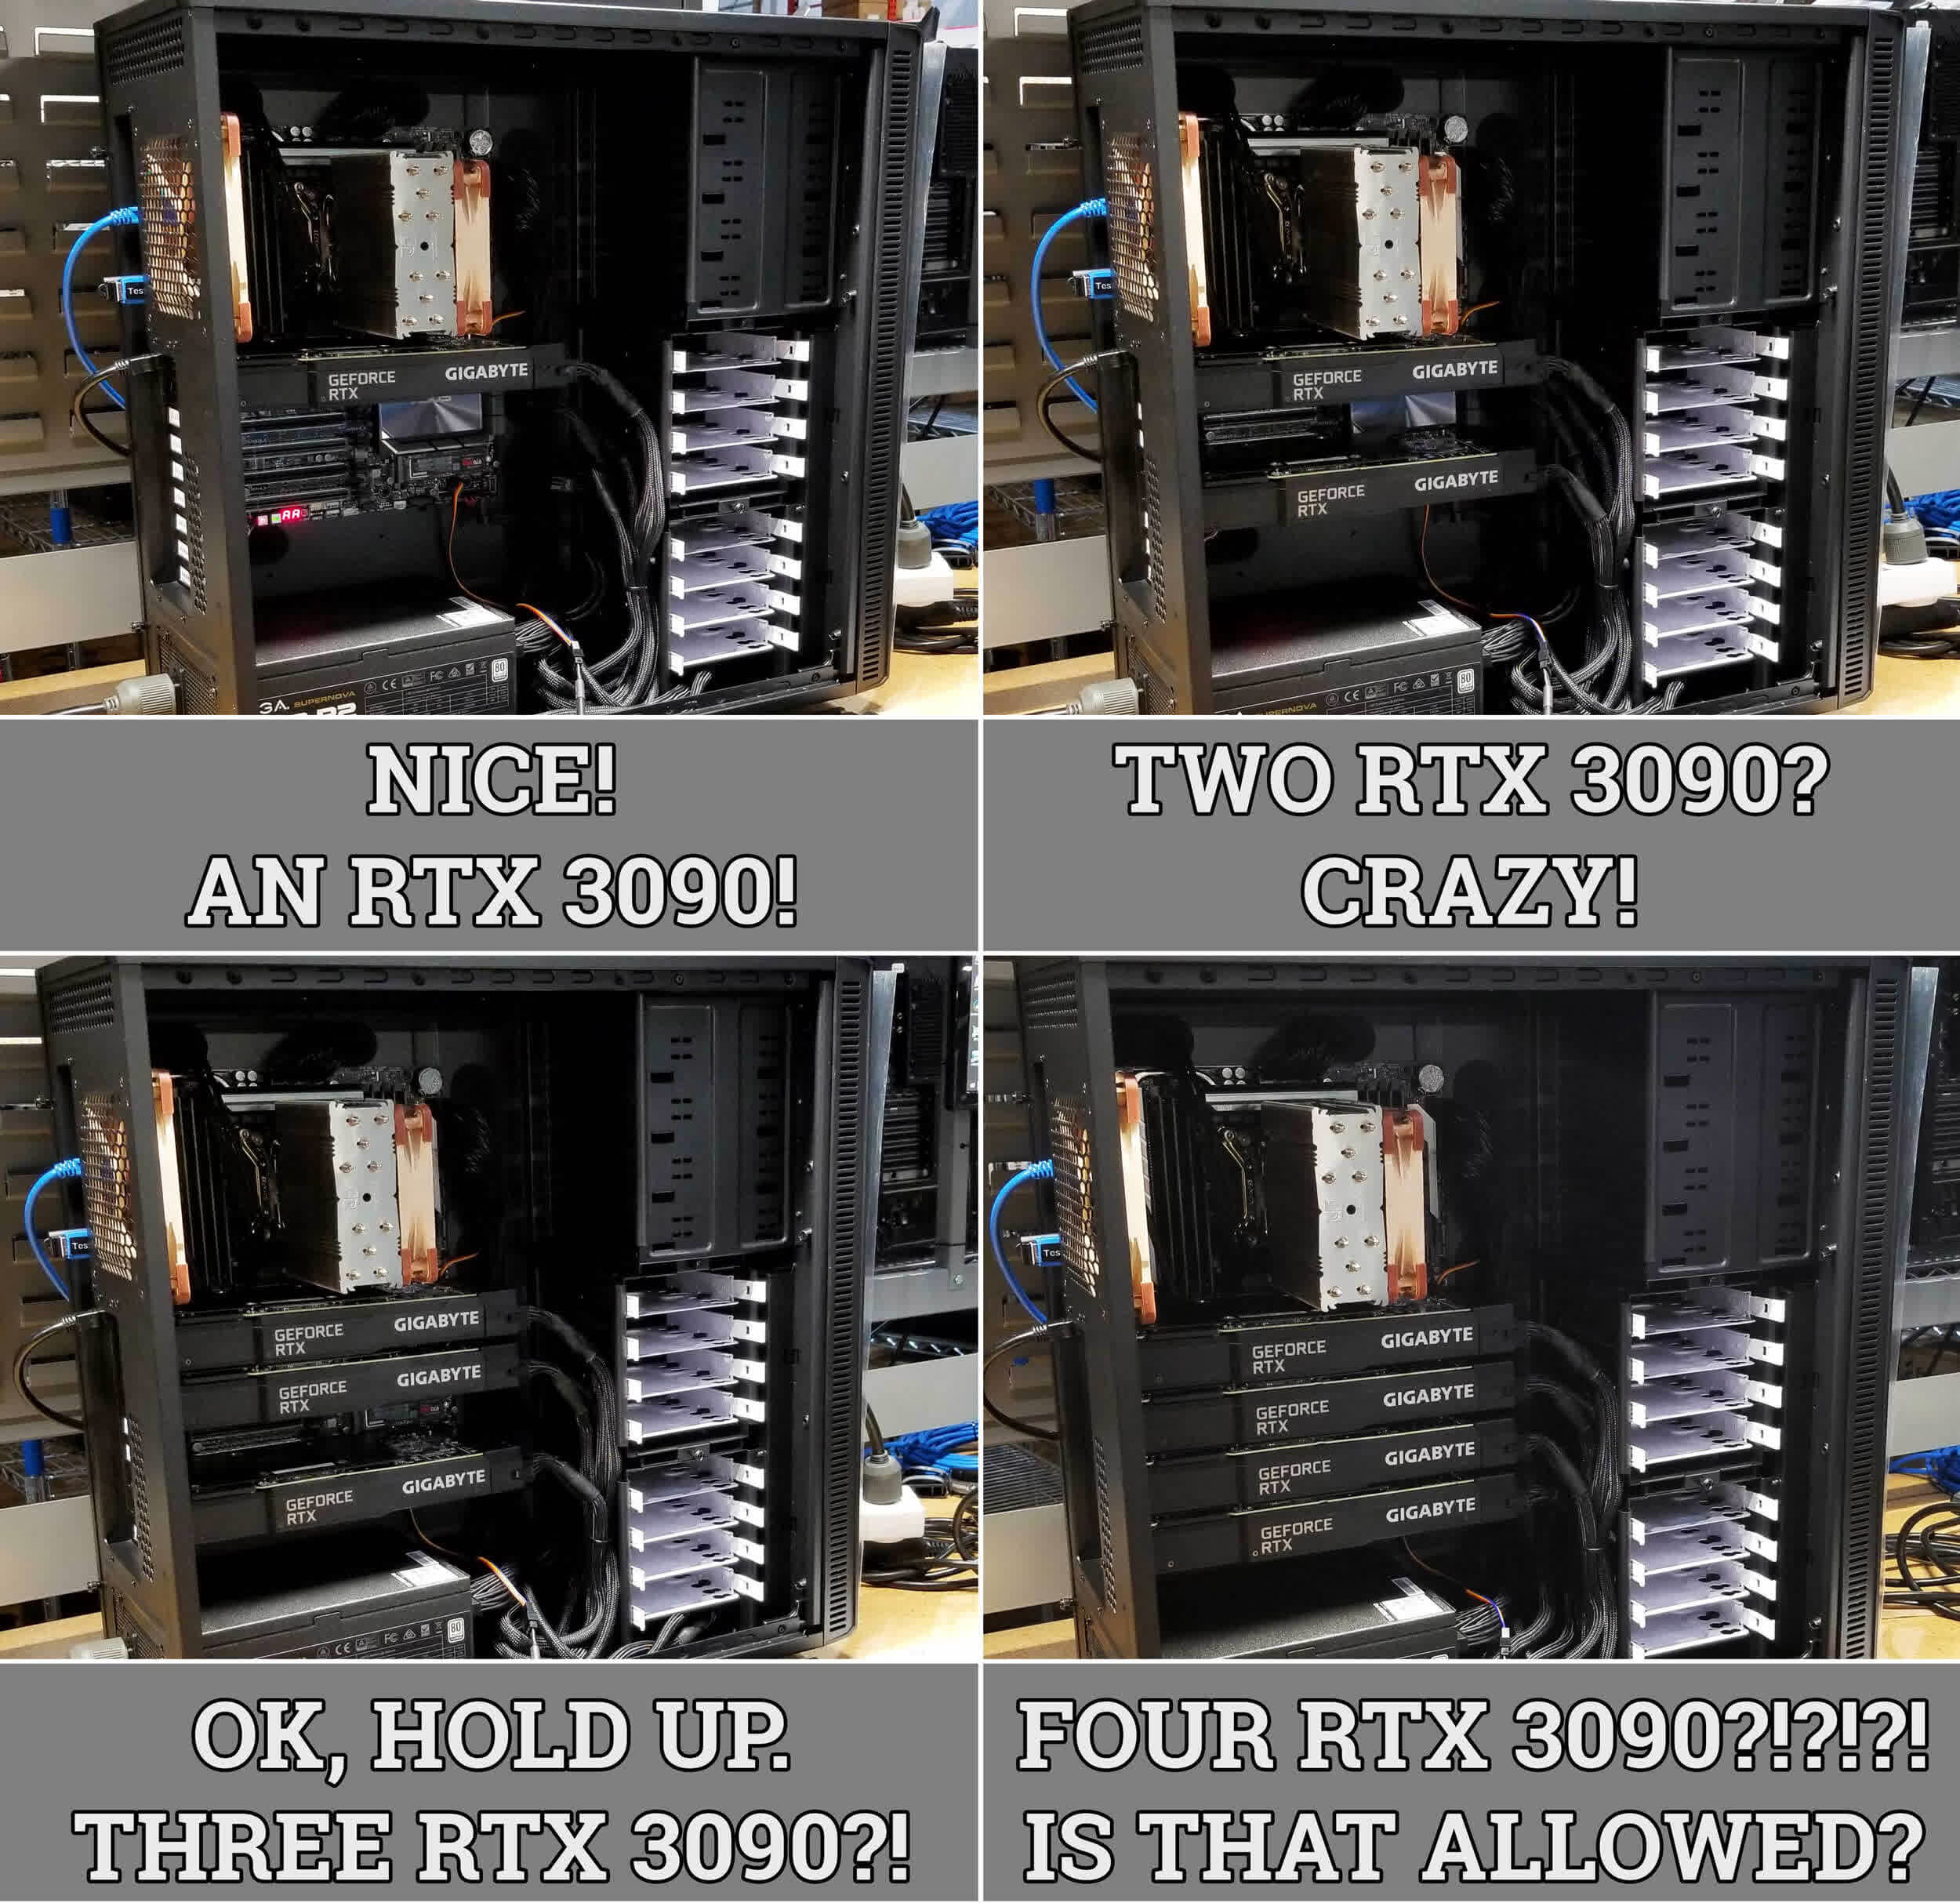 Quad GeForce RTX 3090 tested on a single PC running workstation benchmarks